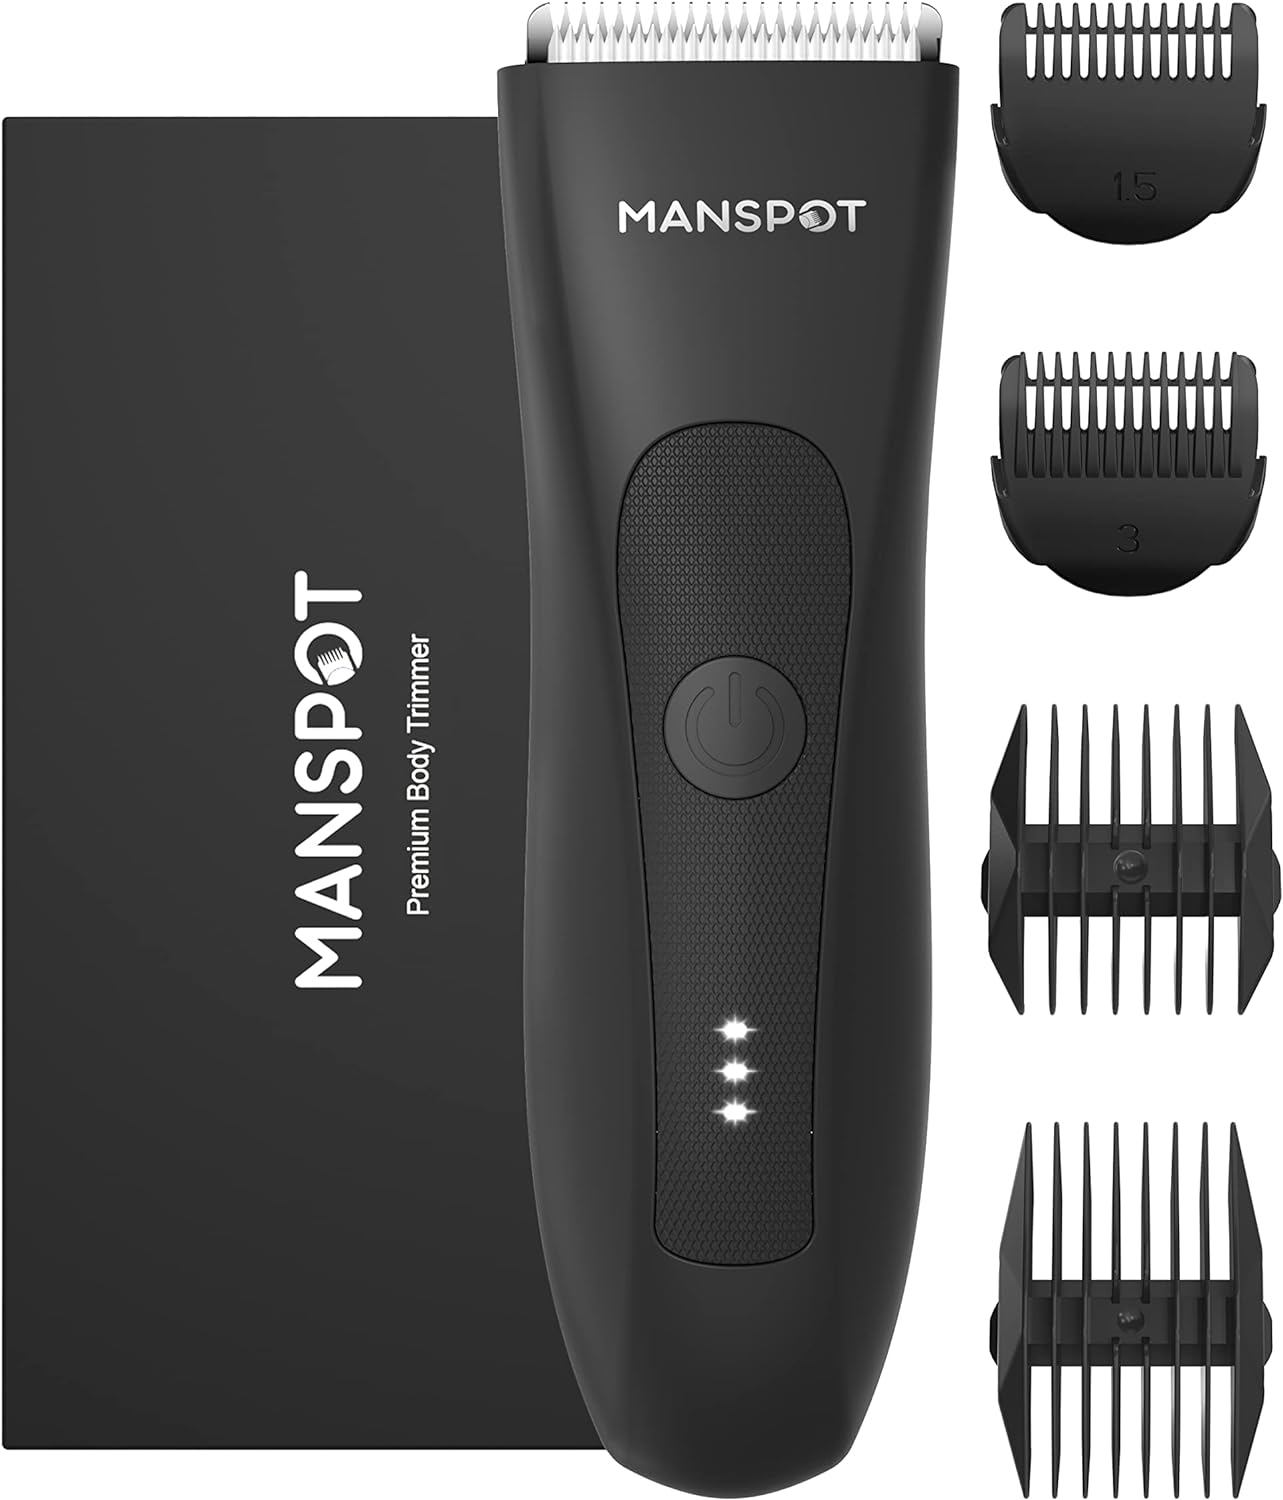 VIKICON Manscape Trimmer for Men IPX7 Waterproof Ball Trimmer w Light ＆ Ceramic Blade, Body Groomer for Pubic Body Groin Grooming, Electric Razor S